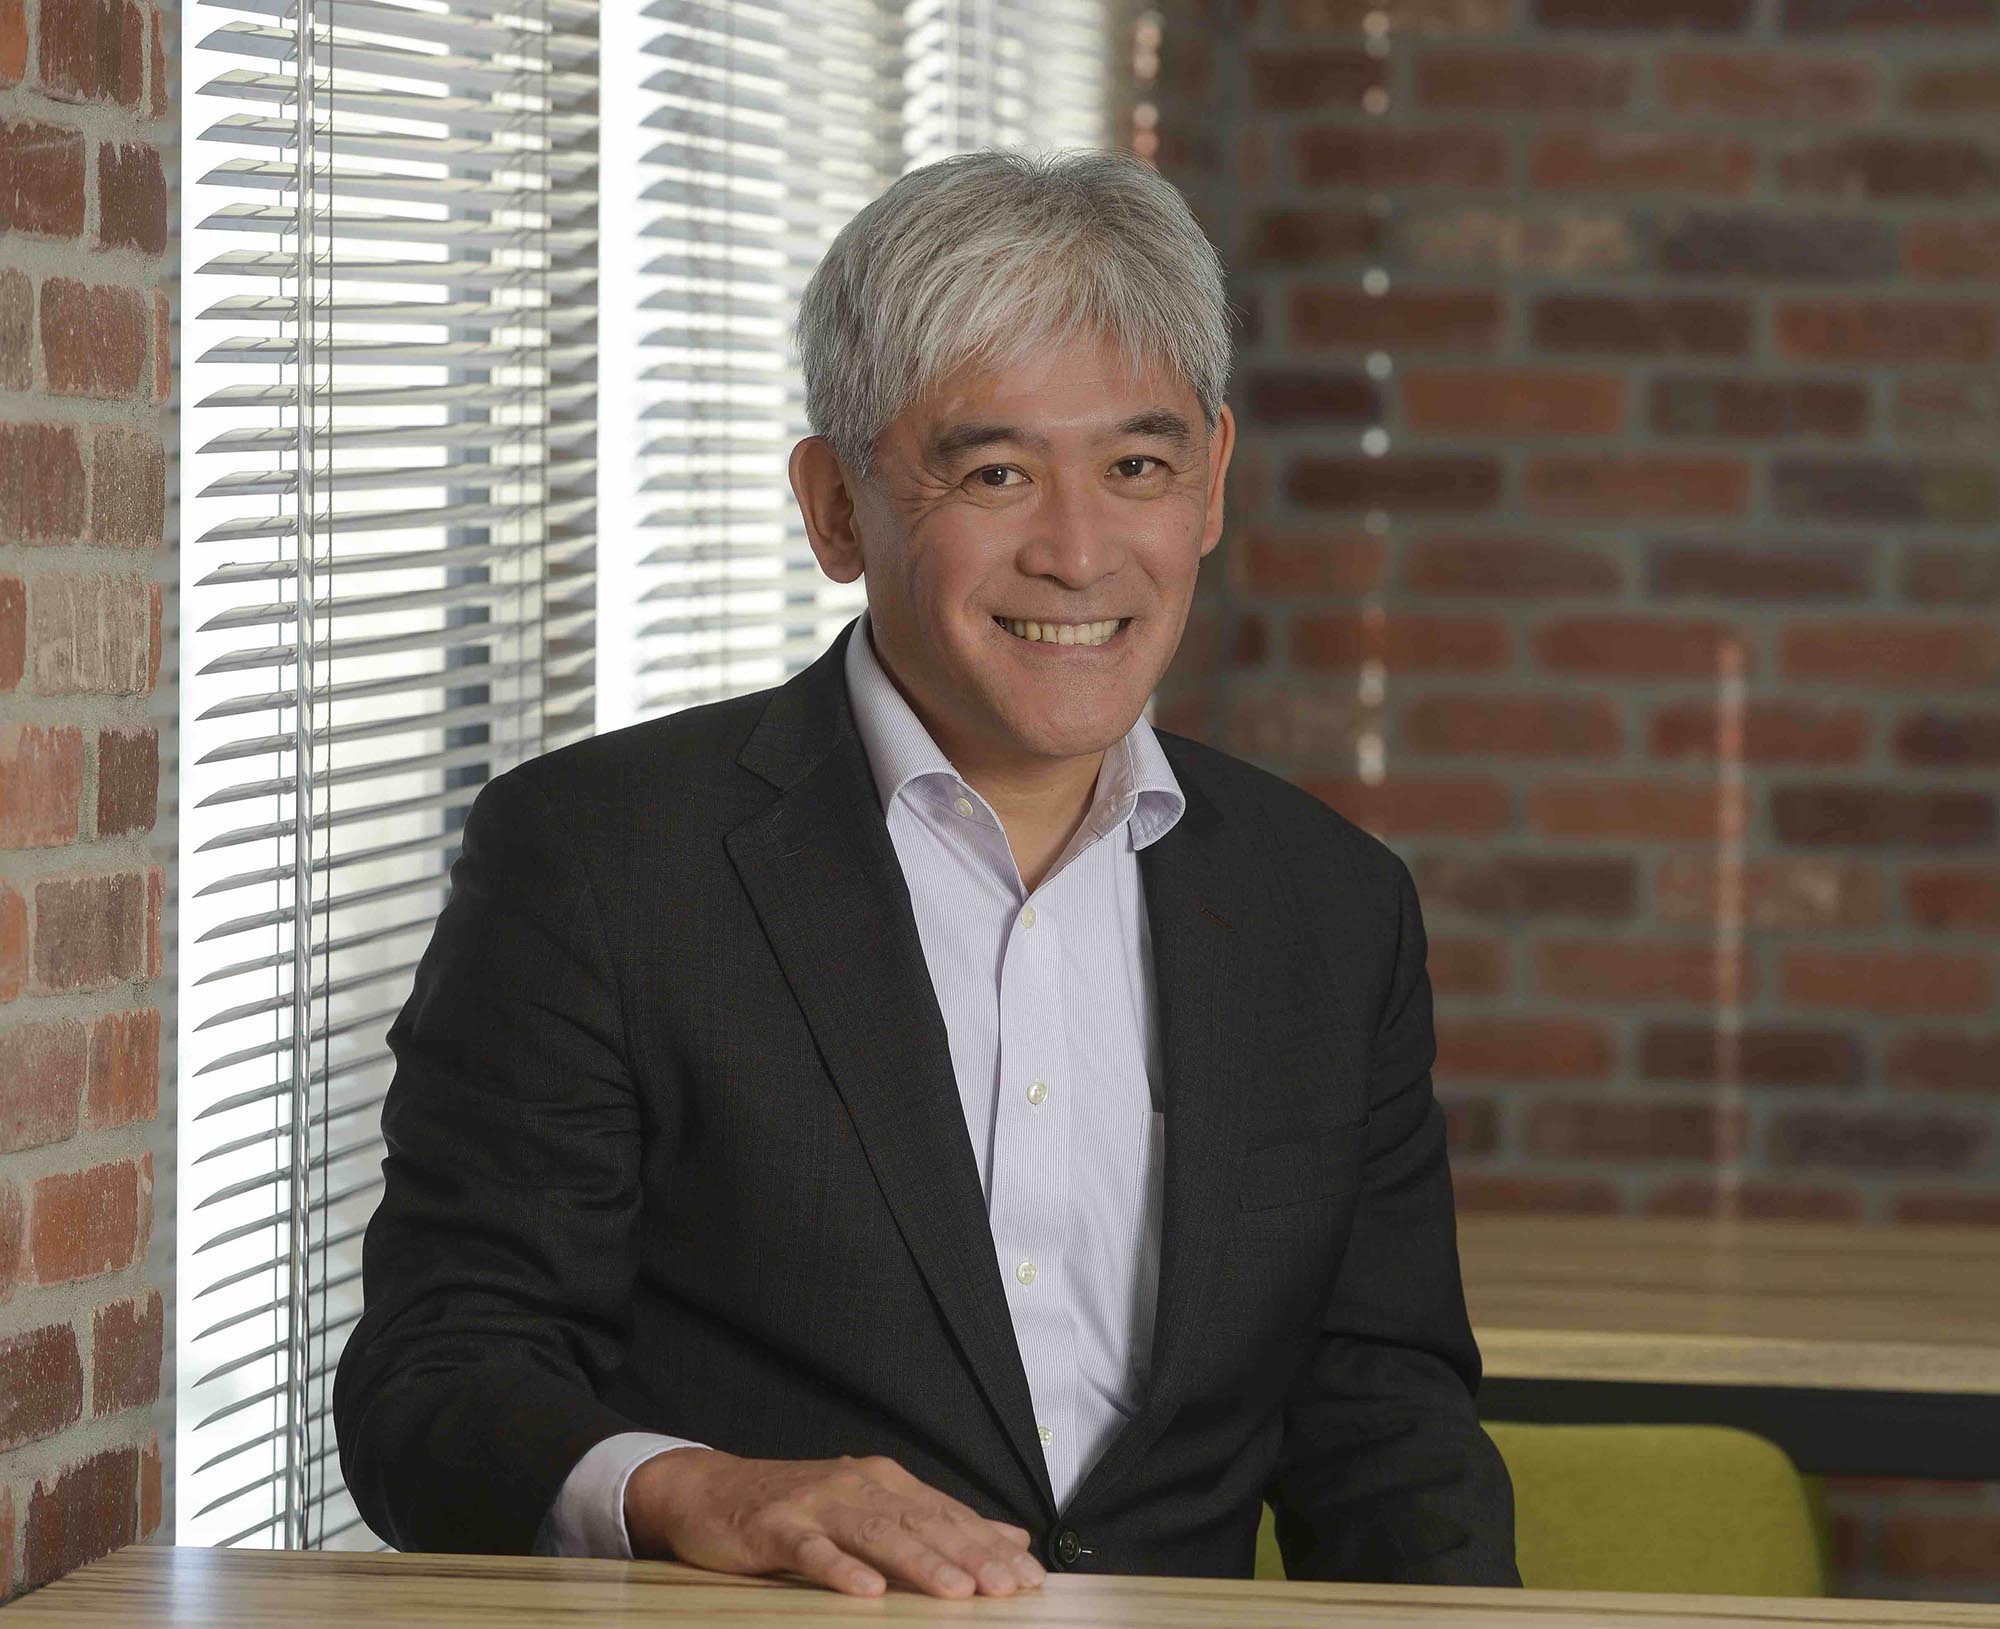 NTT Research, Inc. CEO to speak at the Philippine Digital Convention 2020